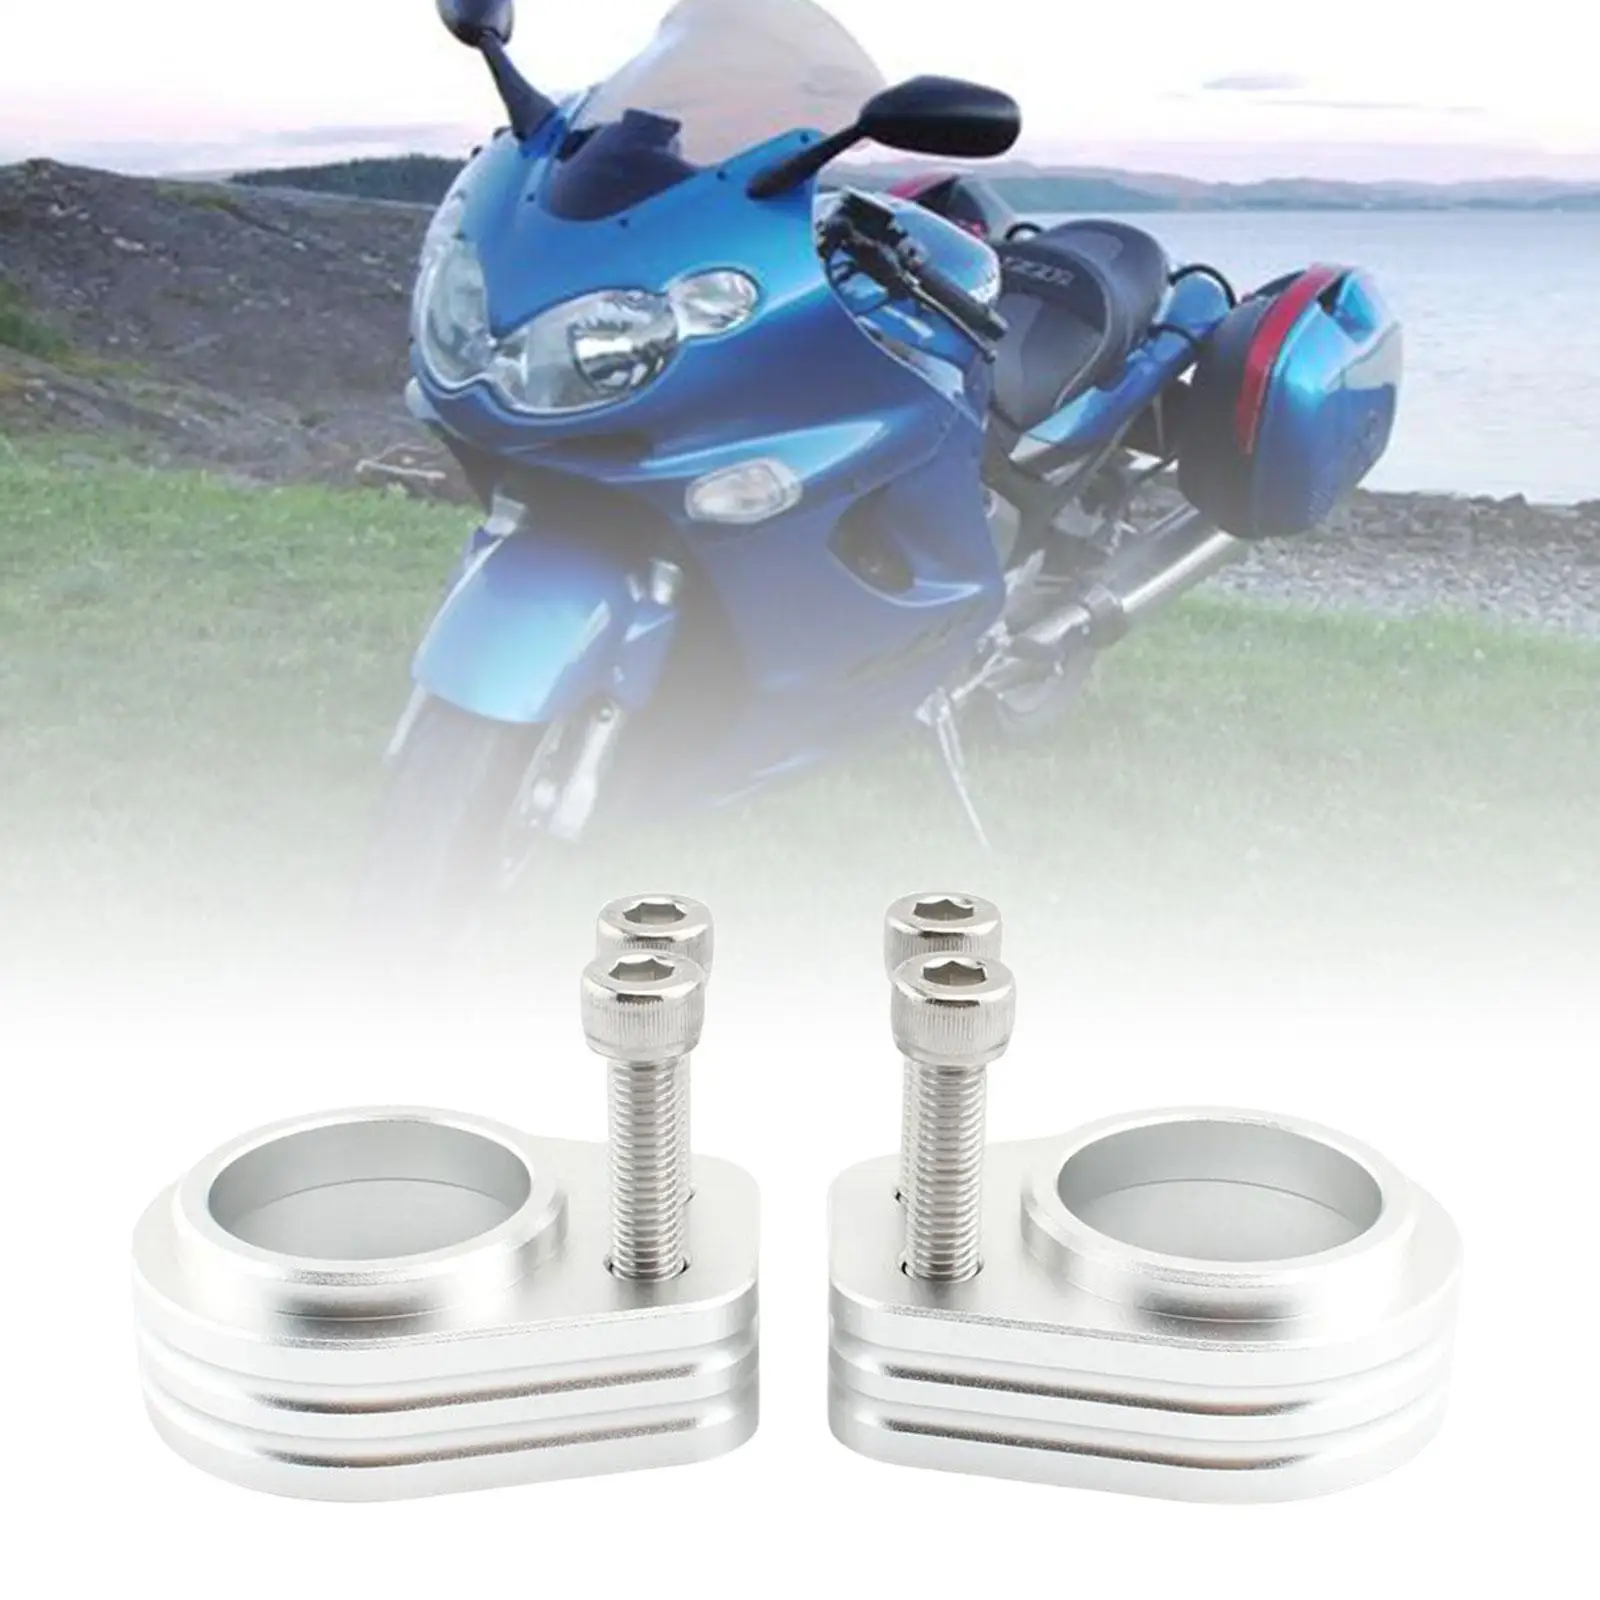 Motorcycle Handlebar Riser Kit 19.5mm Aluminum with Screws Durable for Zzr 1200 Automotive Accessories Good Performance